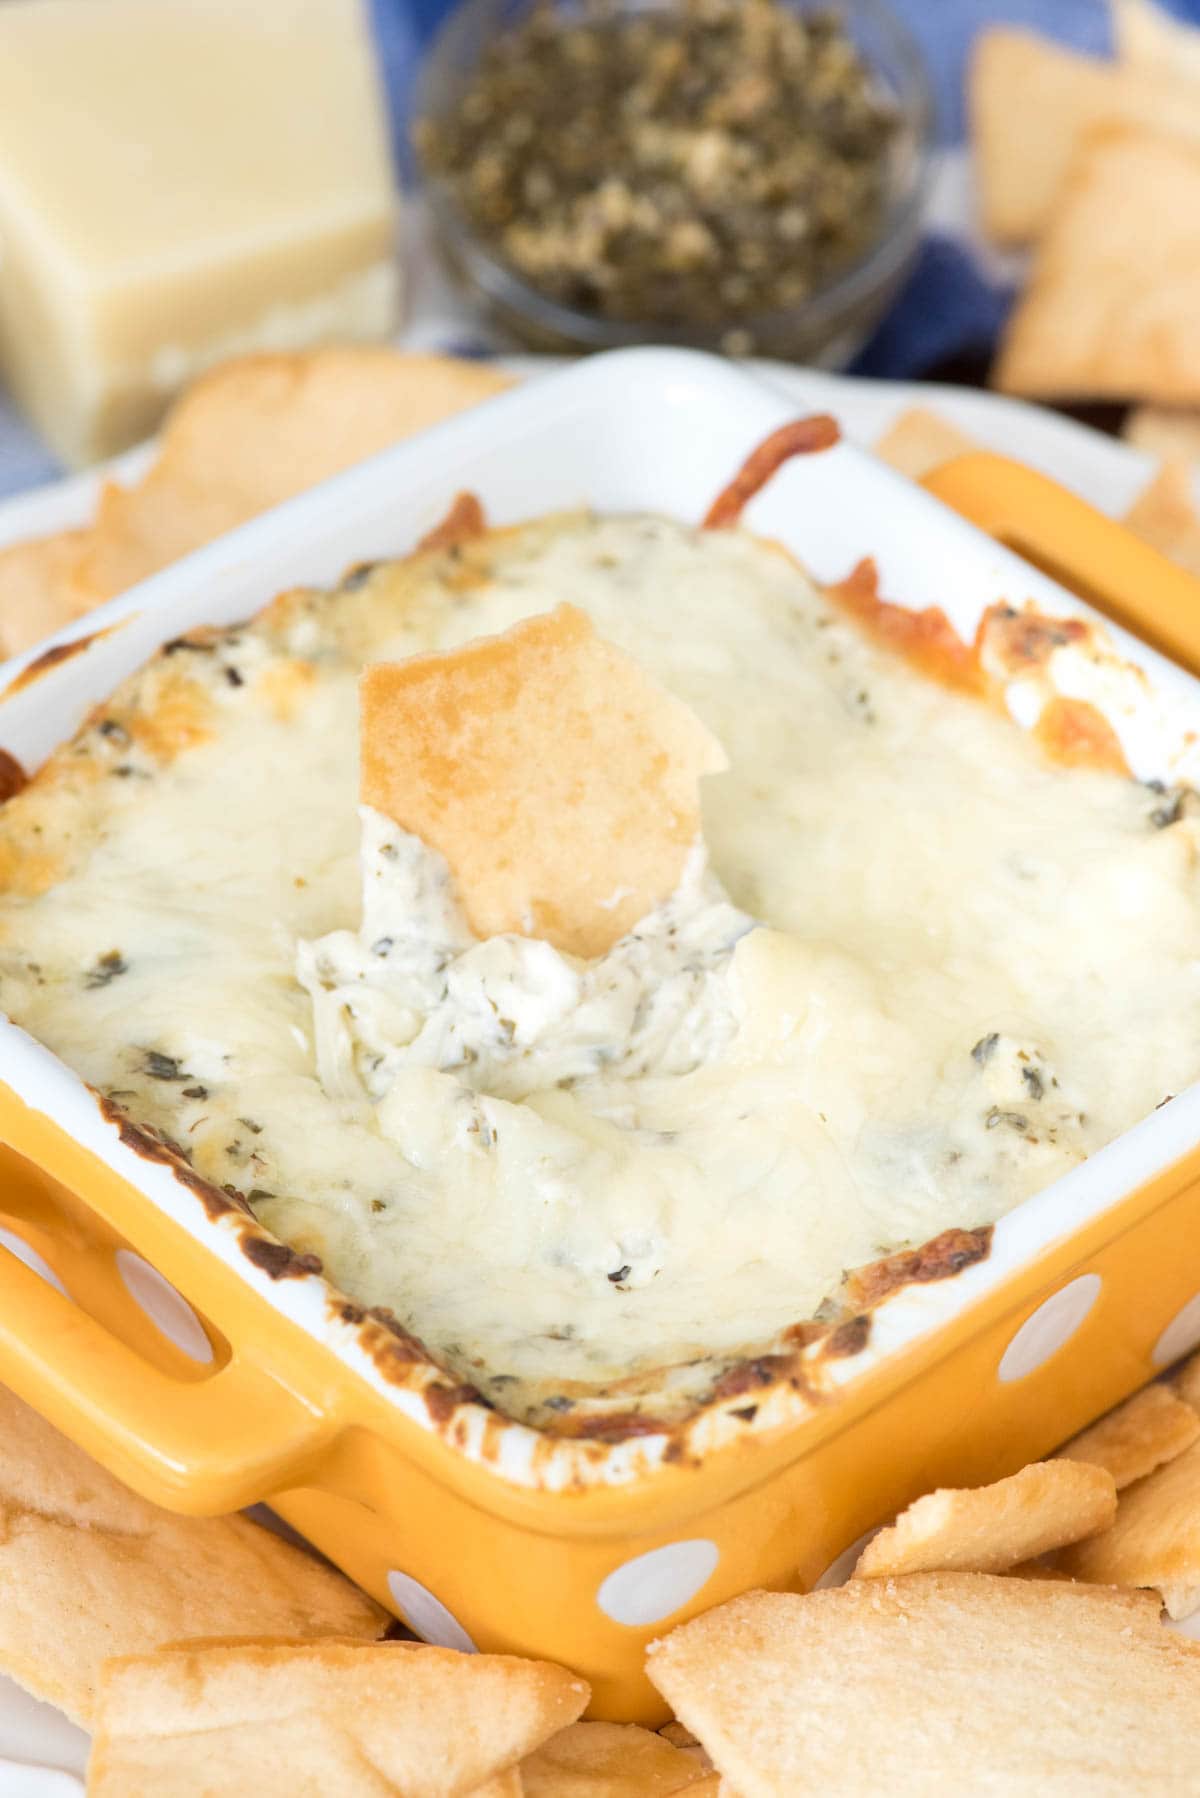 Hot Cheesy Pesto Dip - this super EASY appetizer is the perfect dip! Just 5 ingredients make a gooey cheesy dip full of basil and garlic pesto flavor!